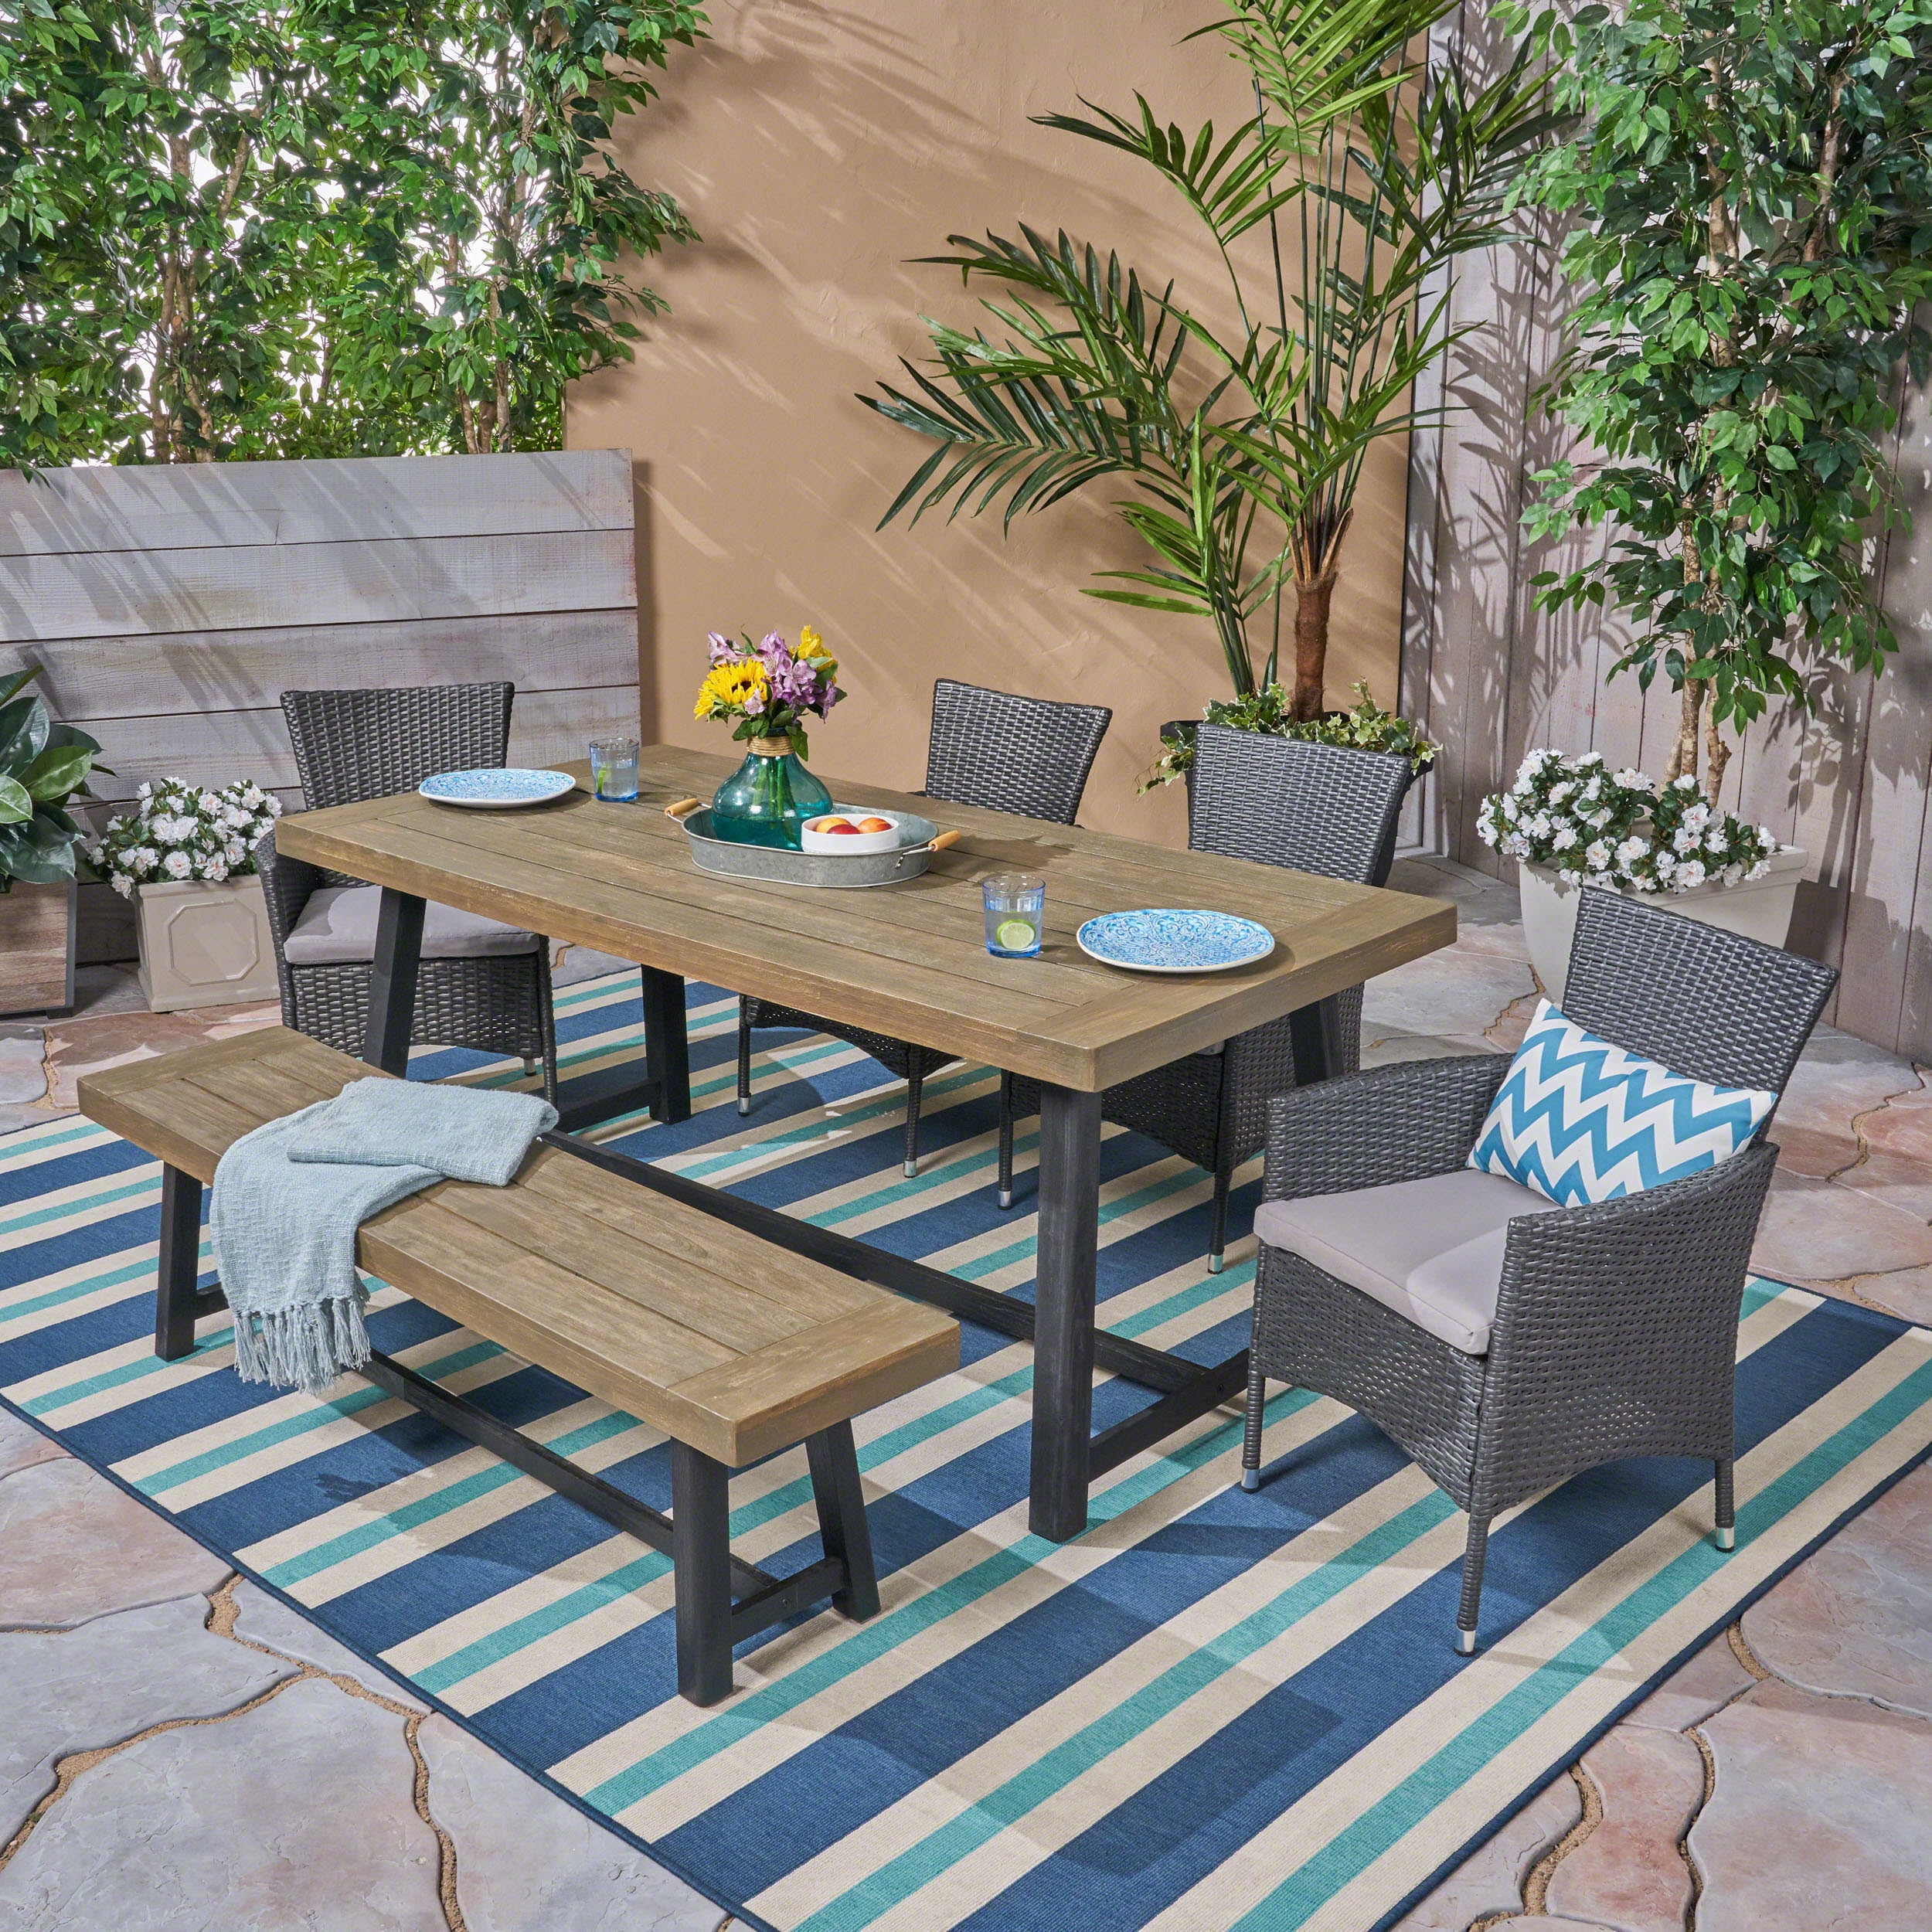 Outdoor Furniture Dining at Stephen Chiles blog